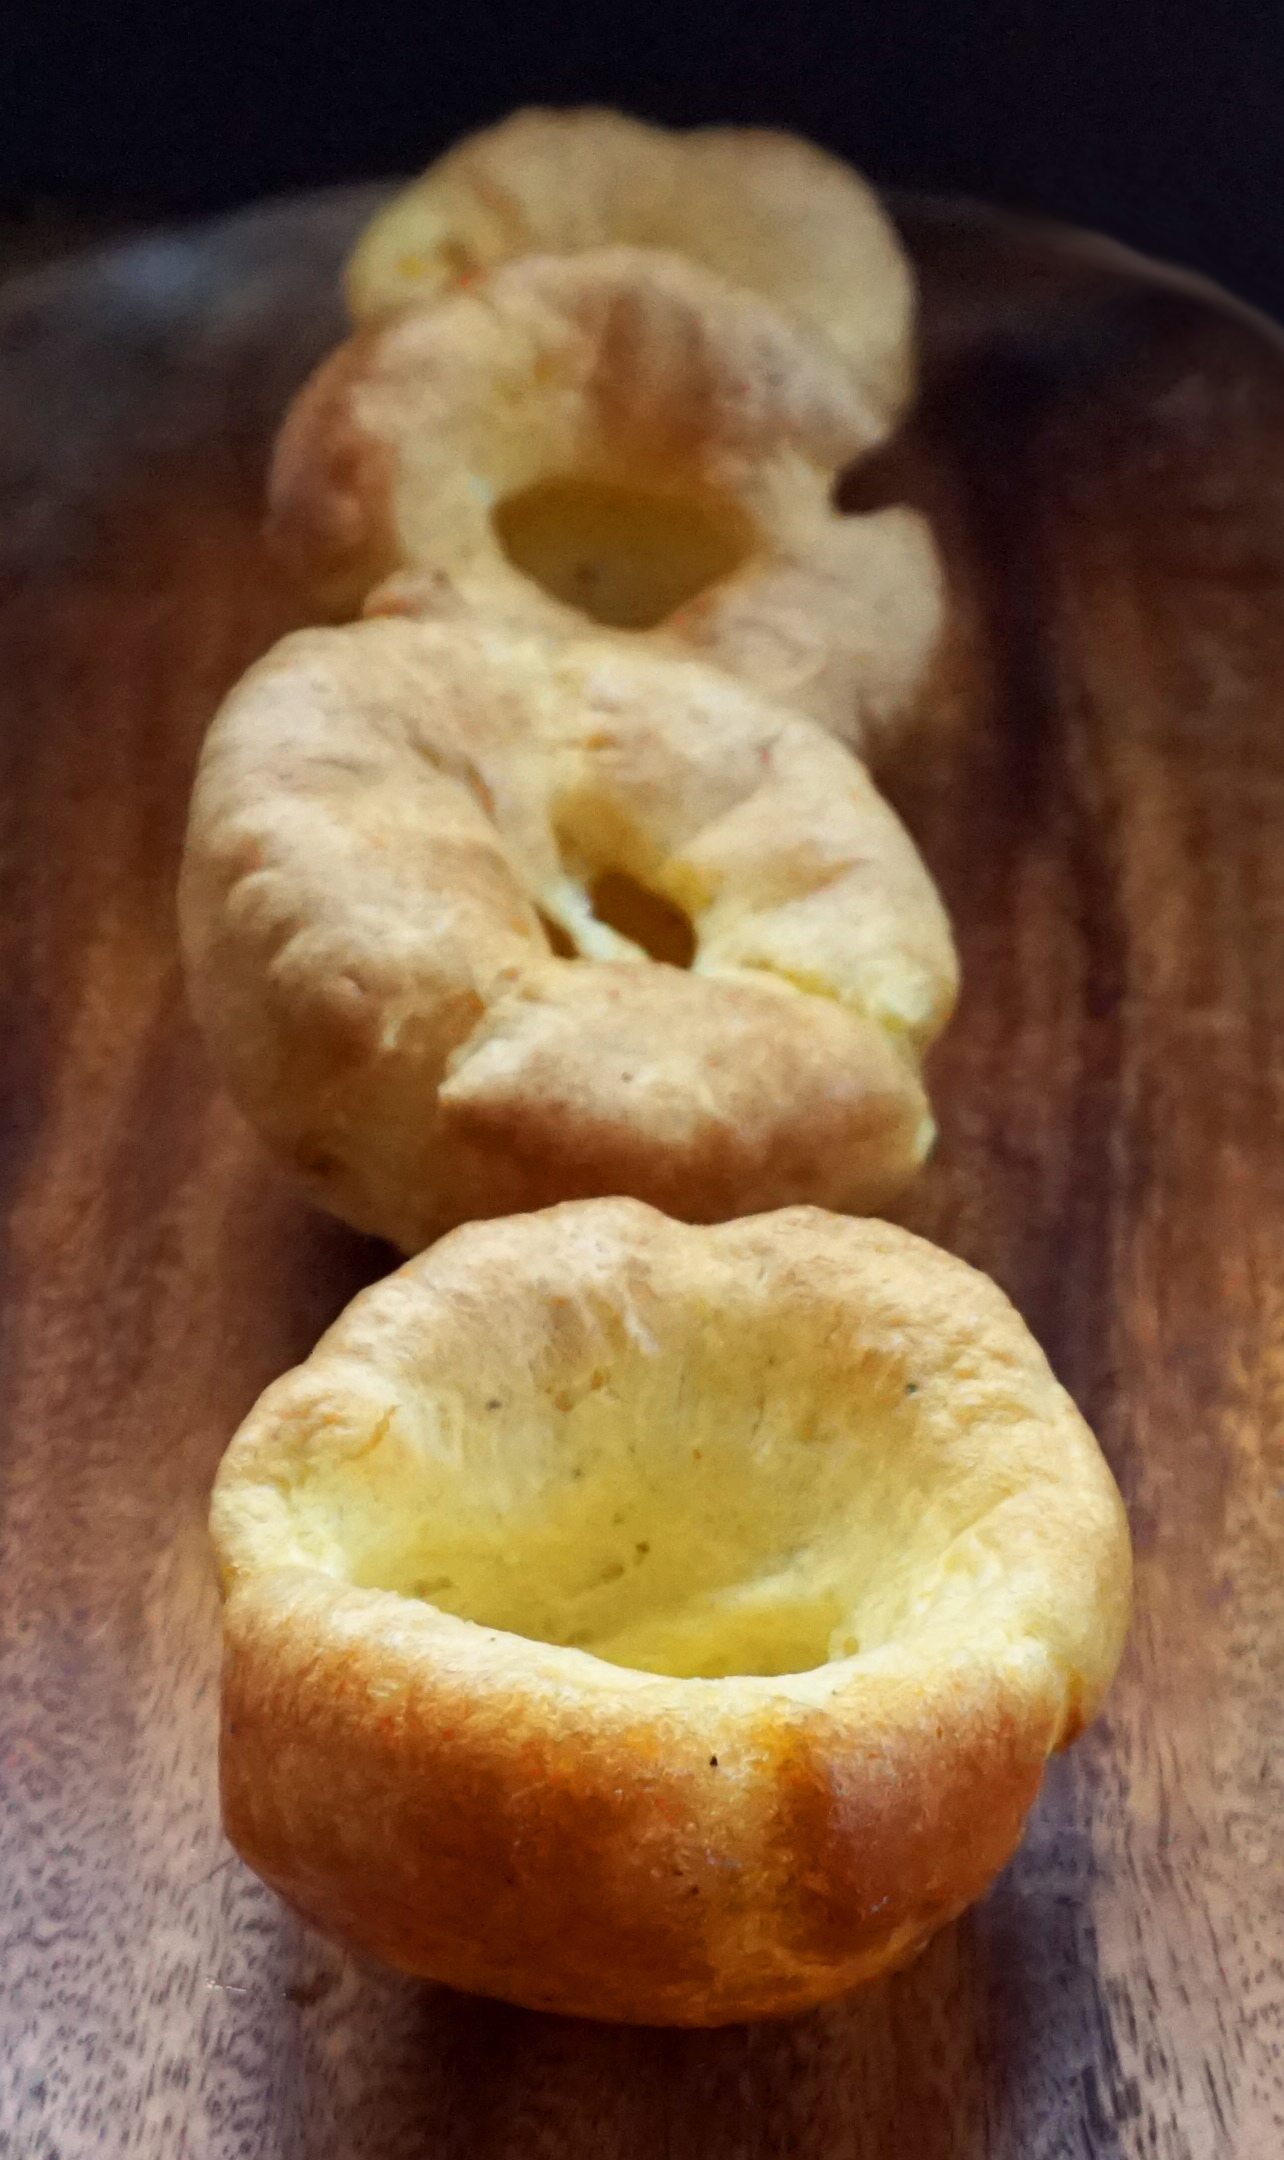 Yorkshire pudding recipe for the holidays